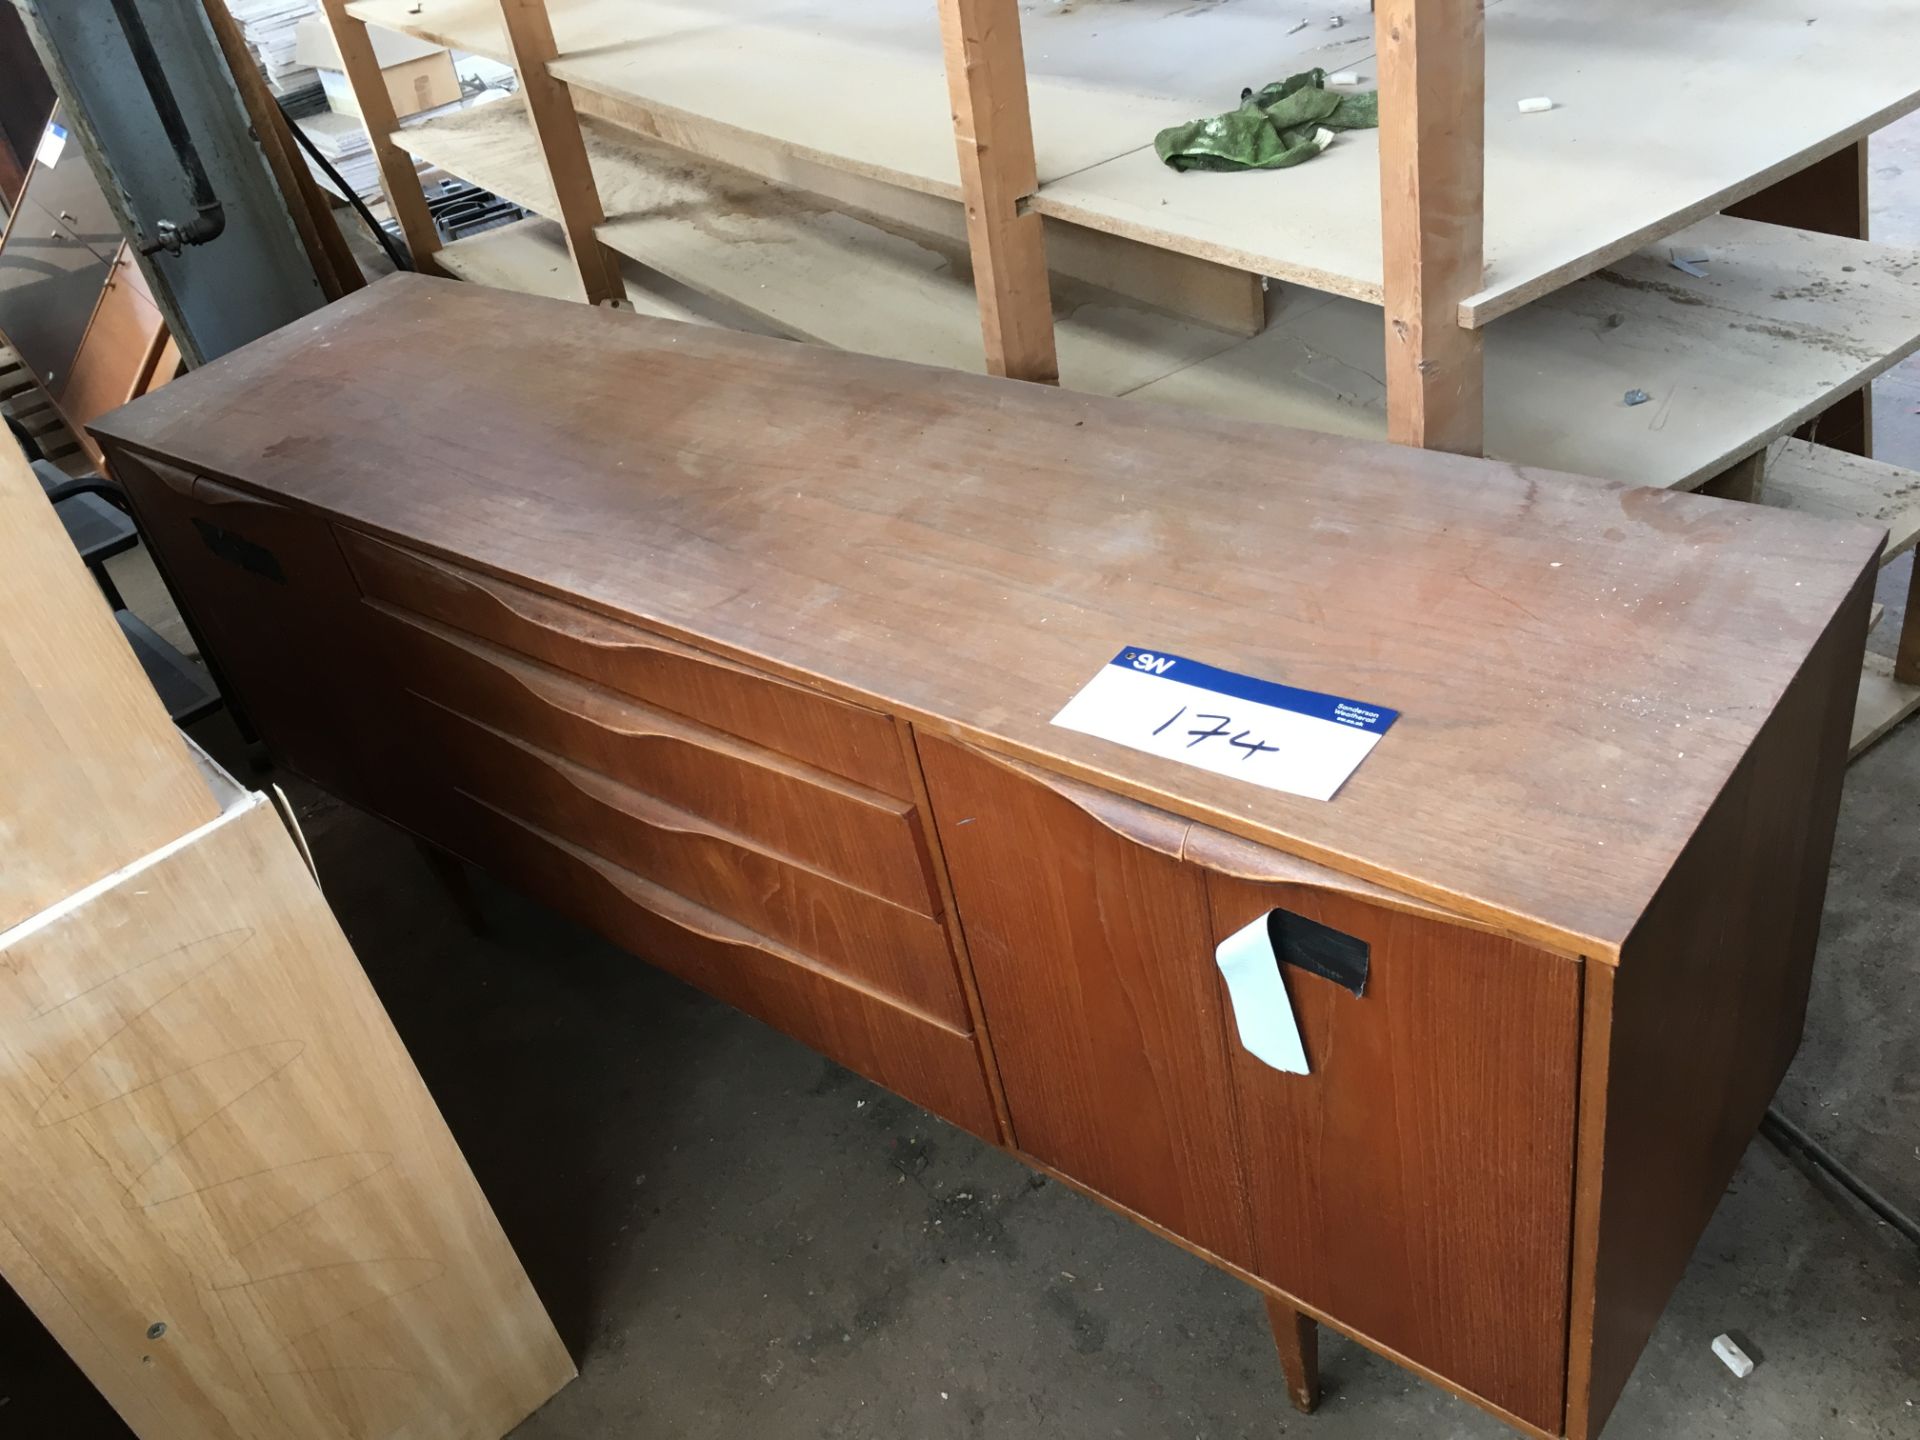 Sideboard, approx 1.83m wide